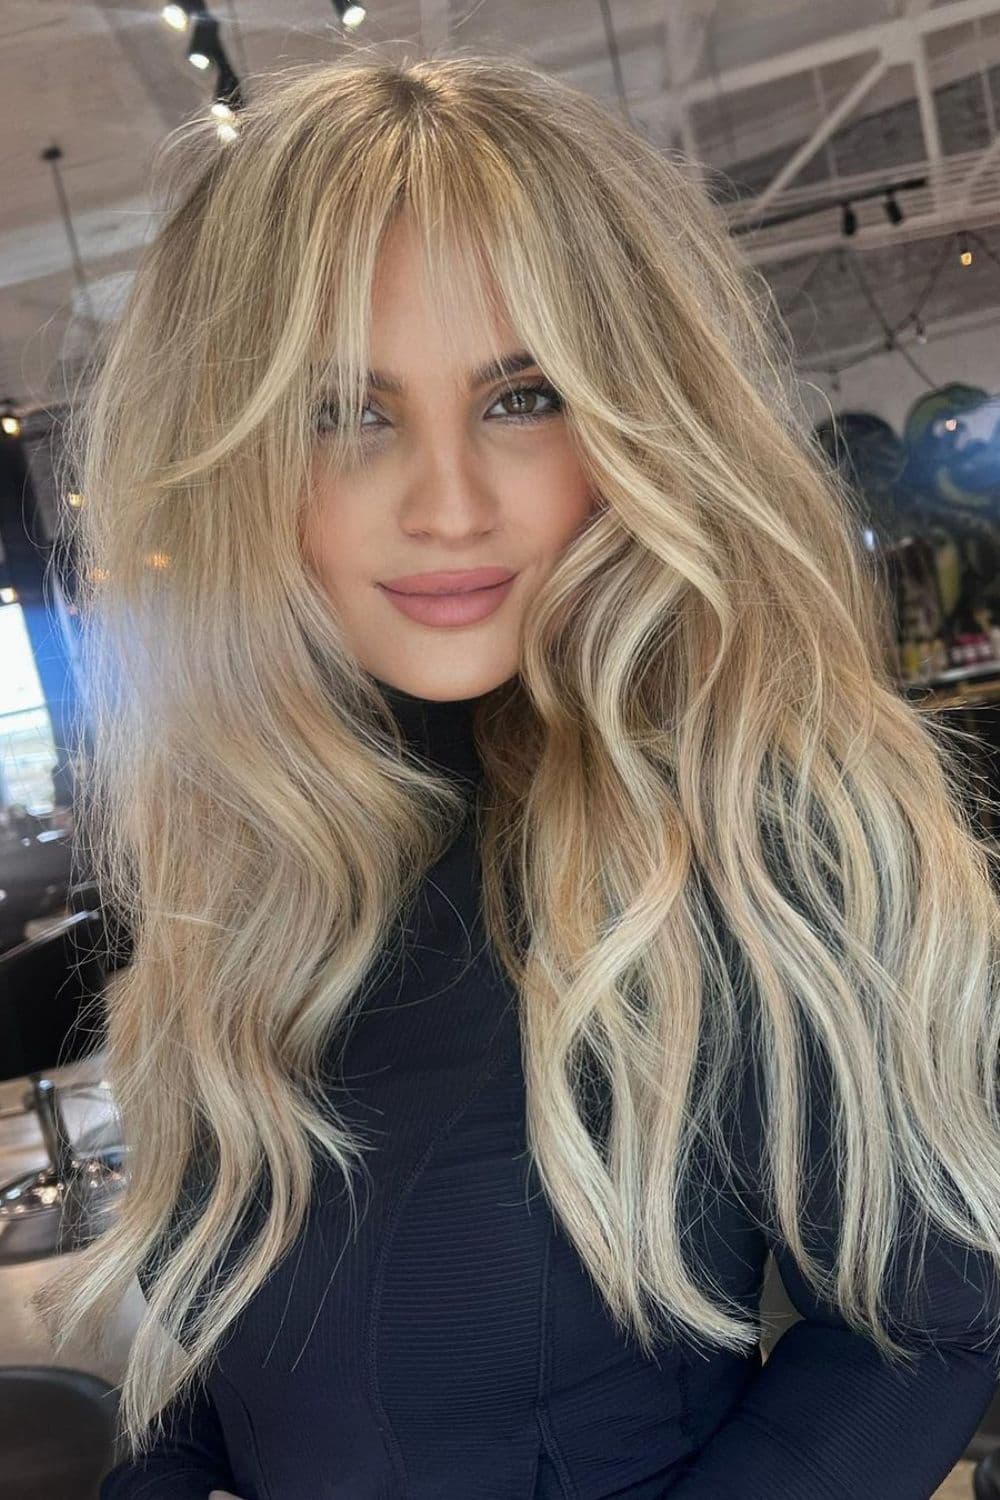 A woman with long blonde hair with wispy curtain bangs.